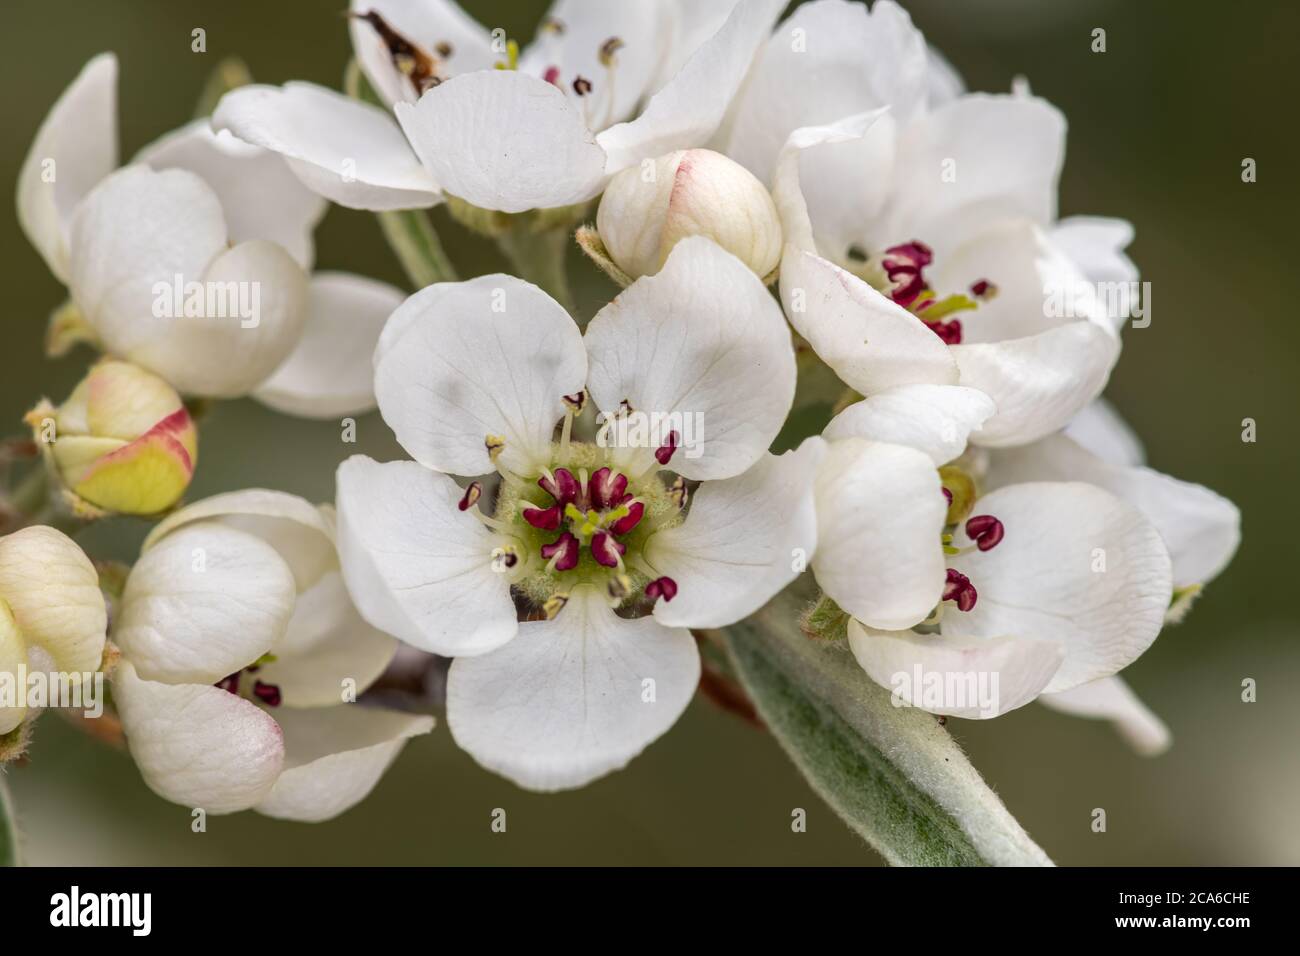 Flowers of Weeping Willow-Leafed Pear (Pyrus salicifolia 'Pendula') Stock Photo